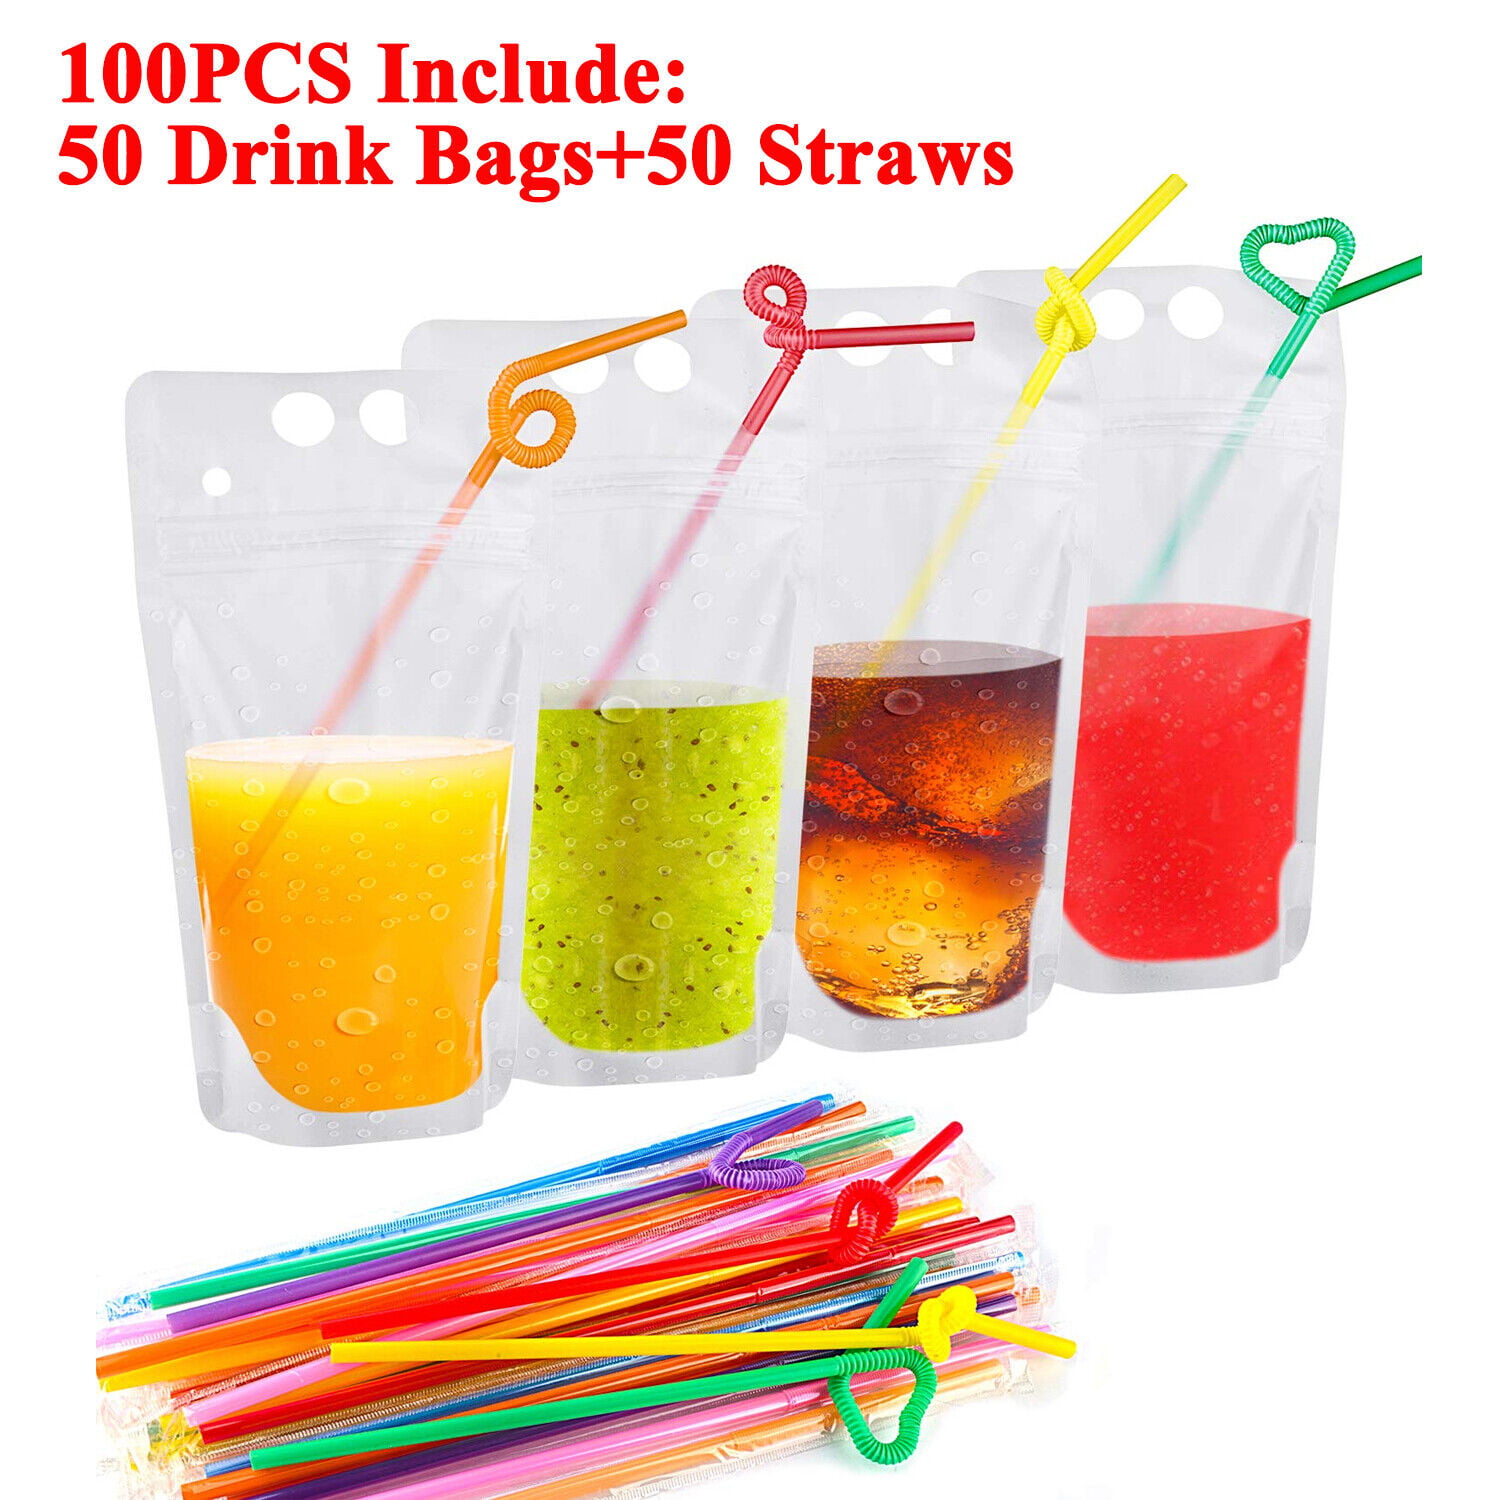 Magic Drink Pouches with Straw Resealable Ice Drink Pouches Smoothie Bags  with Drinking Straws Reusable Juice Pouch Plastic Bag